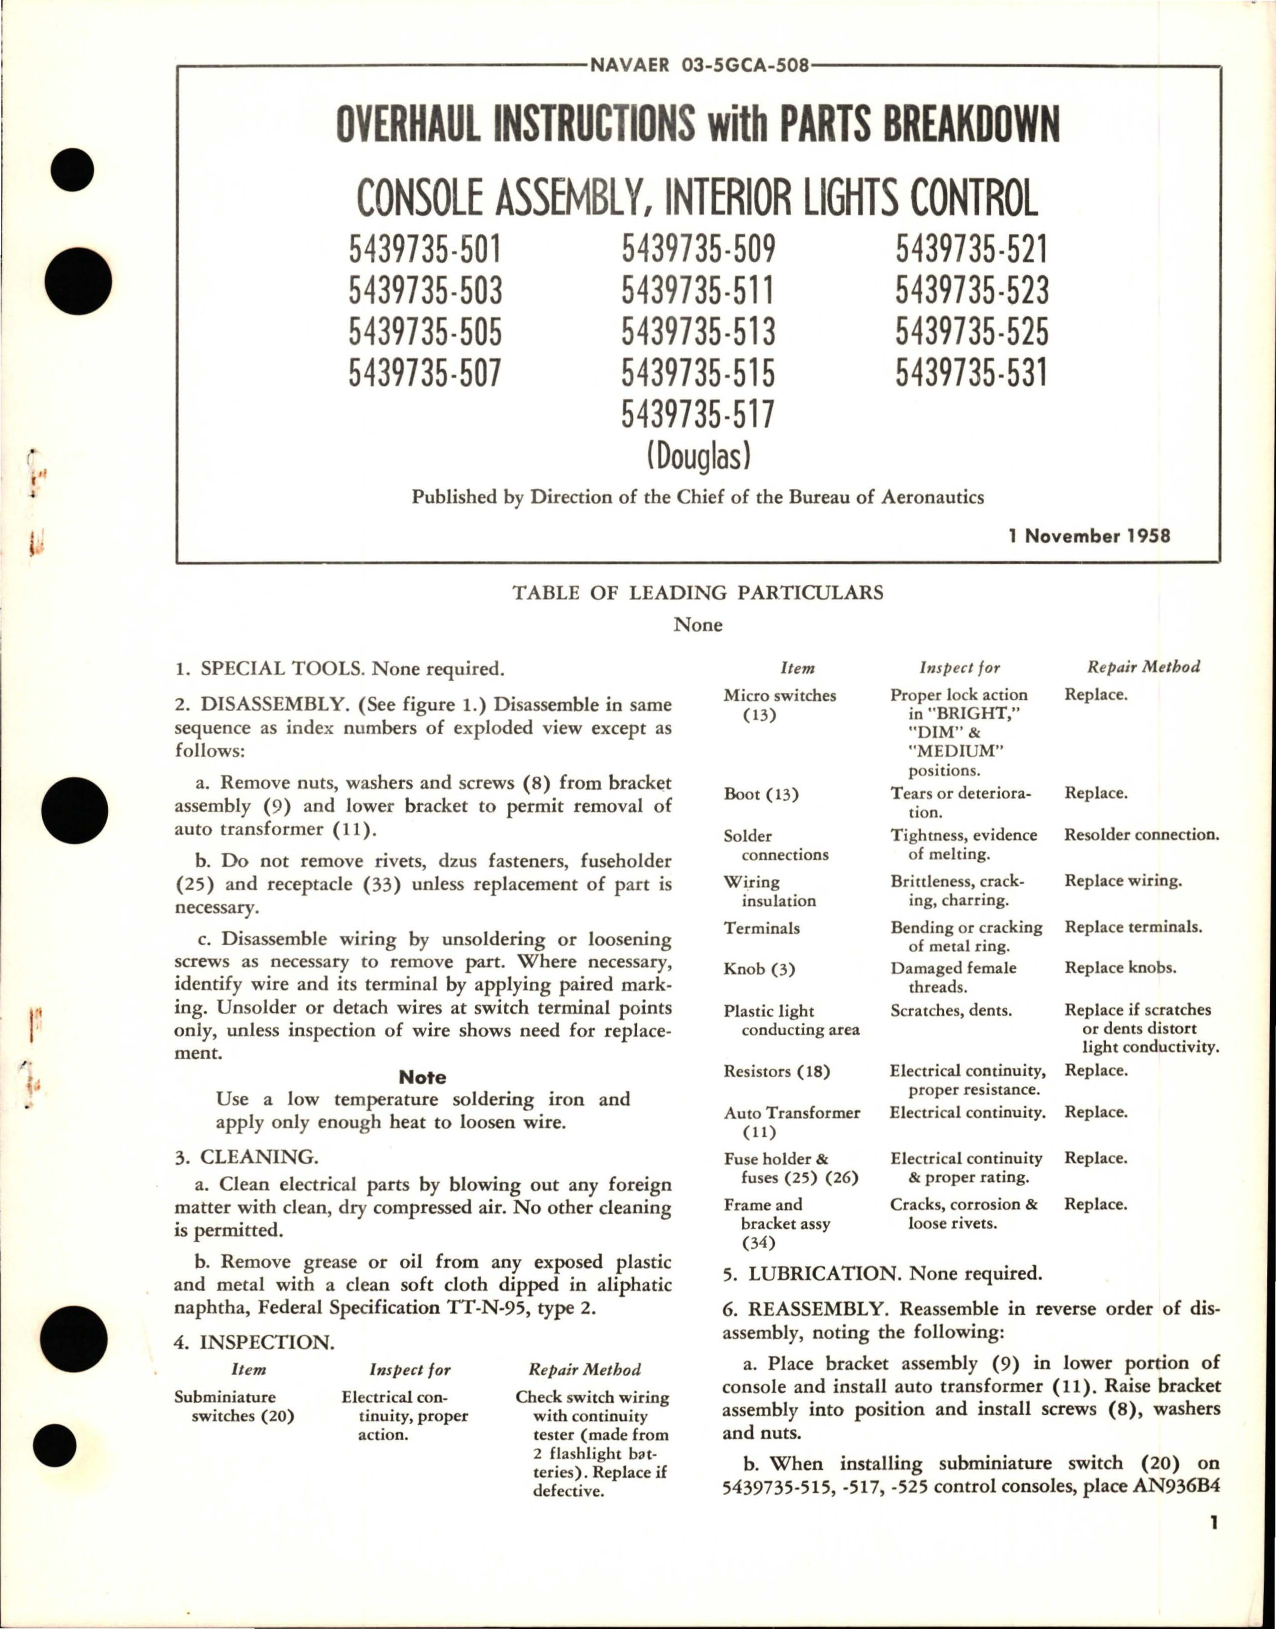 Sample page 1 from AirCorps Library document: Overhaul Instructions with Parts Breakdown for Interior Lights Control Console Assembly 